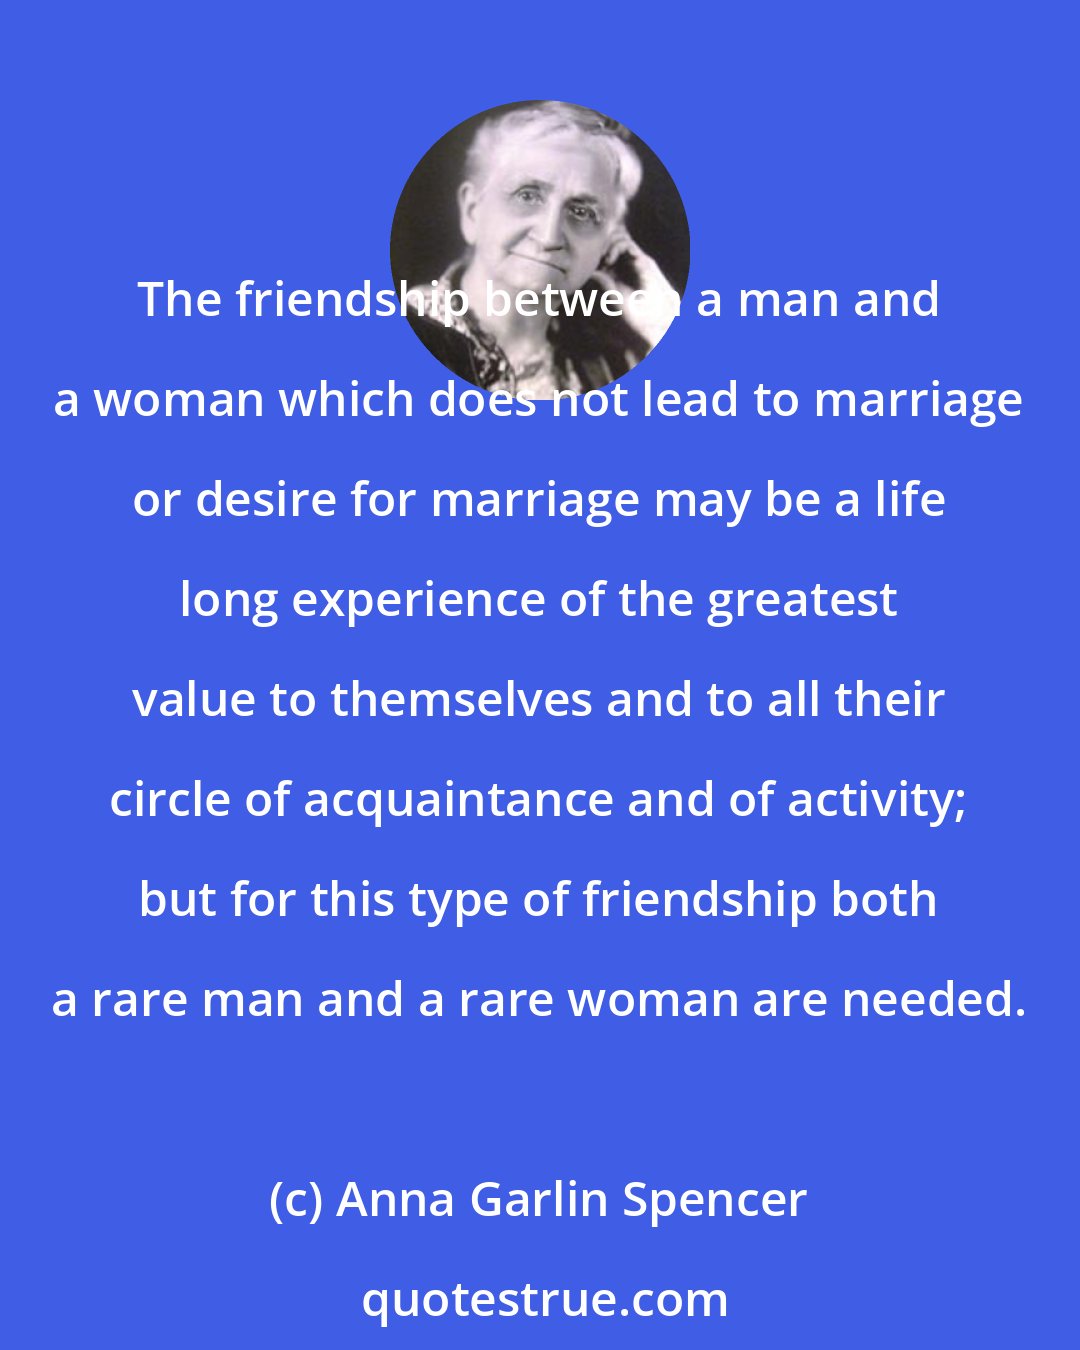 Anna Garlin Spencer: The friendship between a man and a woman which does not lead to marriage or desire for marriage may be a life long experience of the greatest value to themselves and to all their circle of acquaintance and of activity; but for this type of friendship both a rare man and a rare woman are needed.